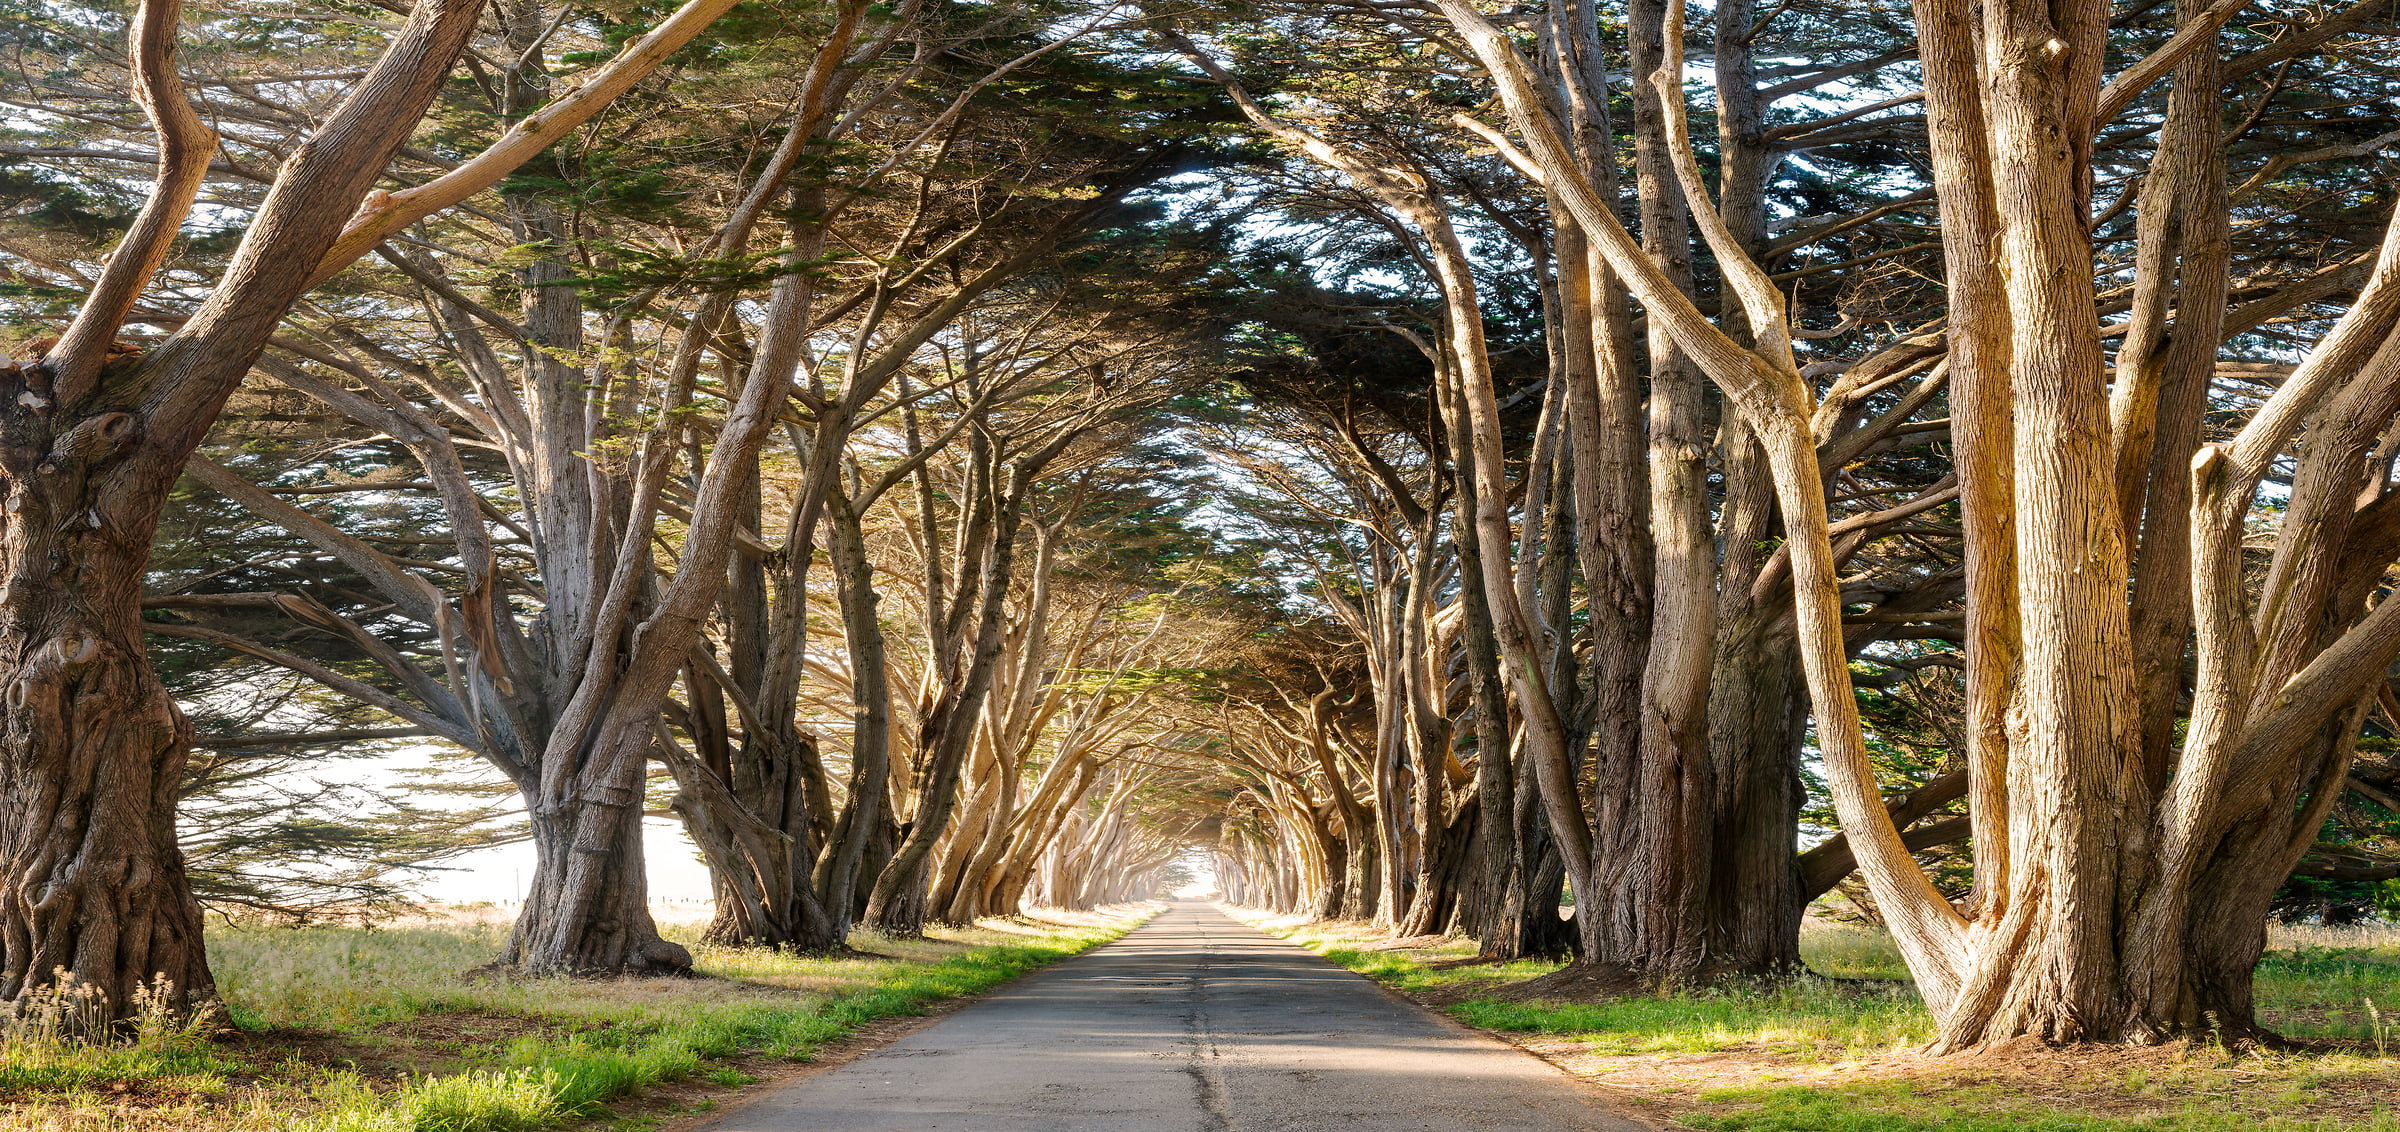 535 megapixels! A very high resolution, large-format VAST photo of a tunnel of cypress trees with a road going down the middle; fine art nature photograph created by Justin Katz in Point Reyes National Seashore, California.